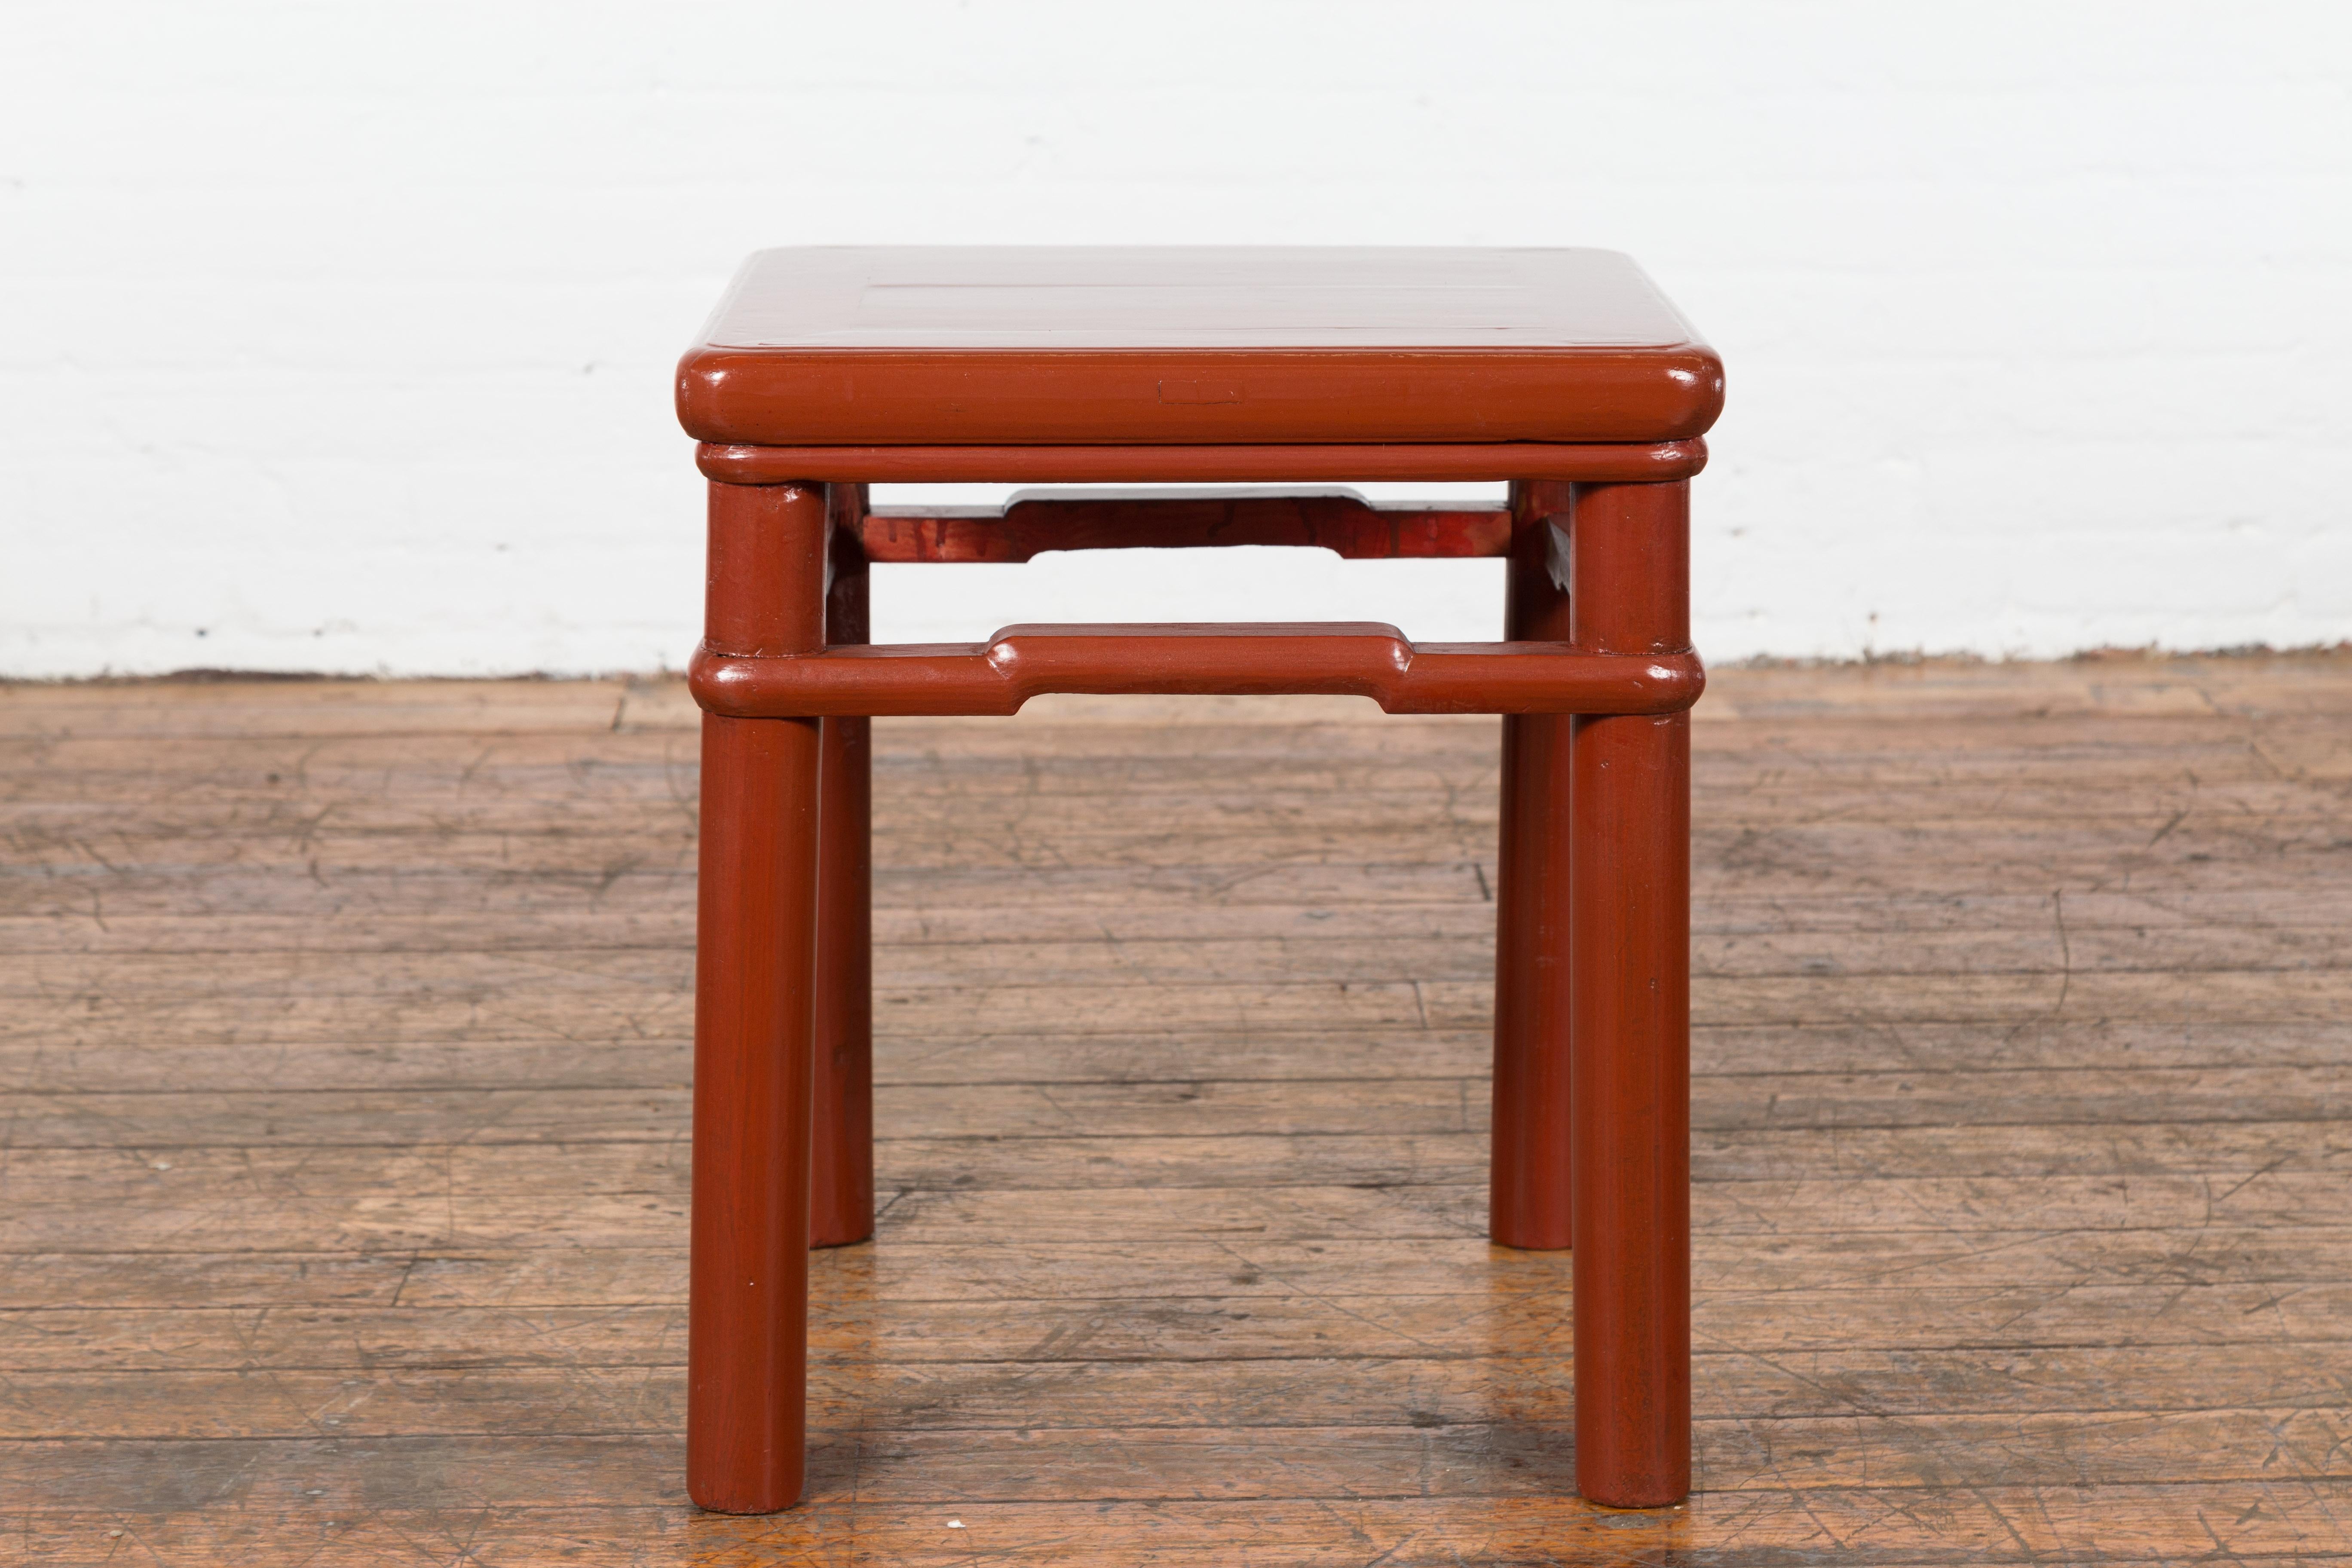 Chinese 1900s Qing Dynasty Red Lacquer Stool or Table with Humpback Stretchers For Sale 11